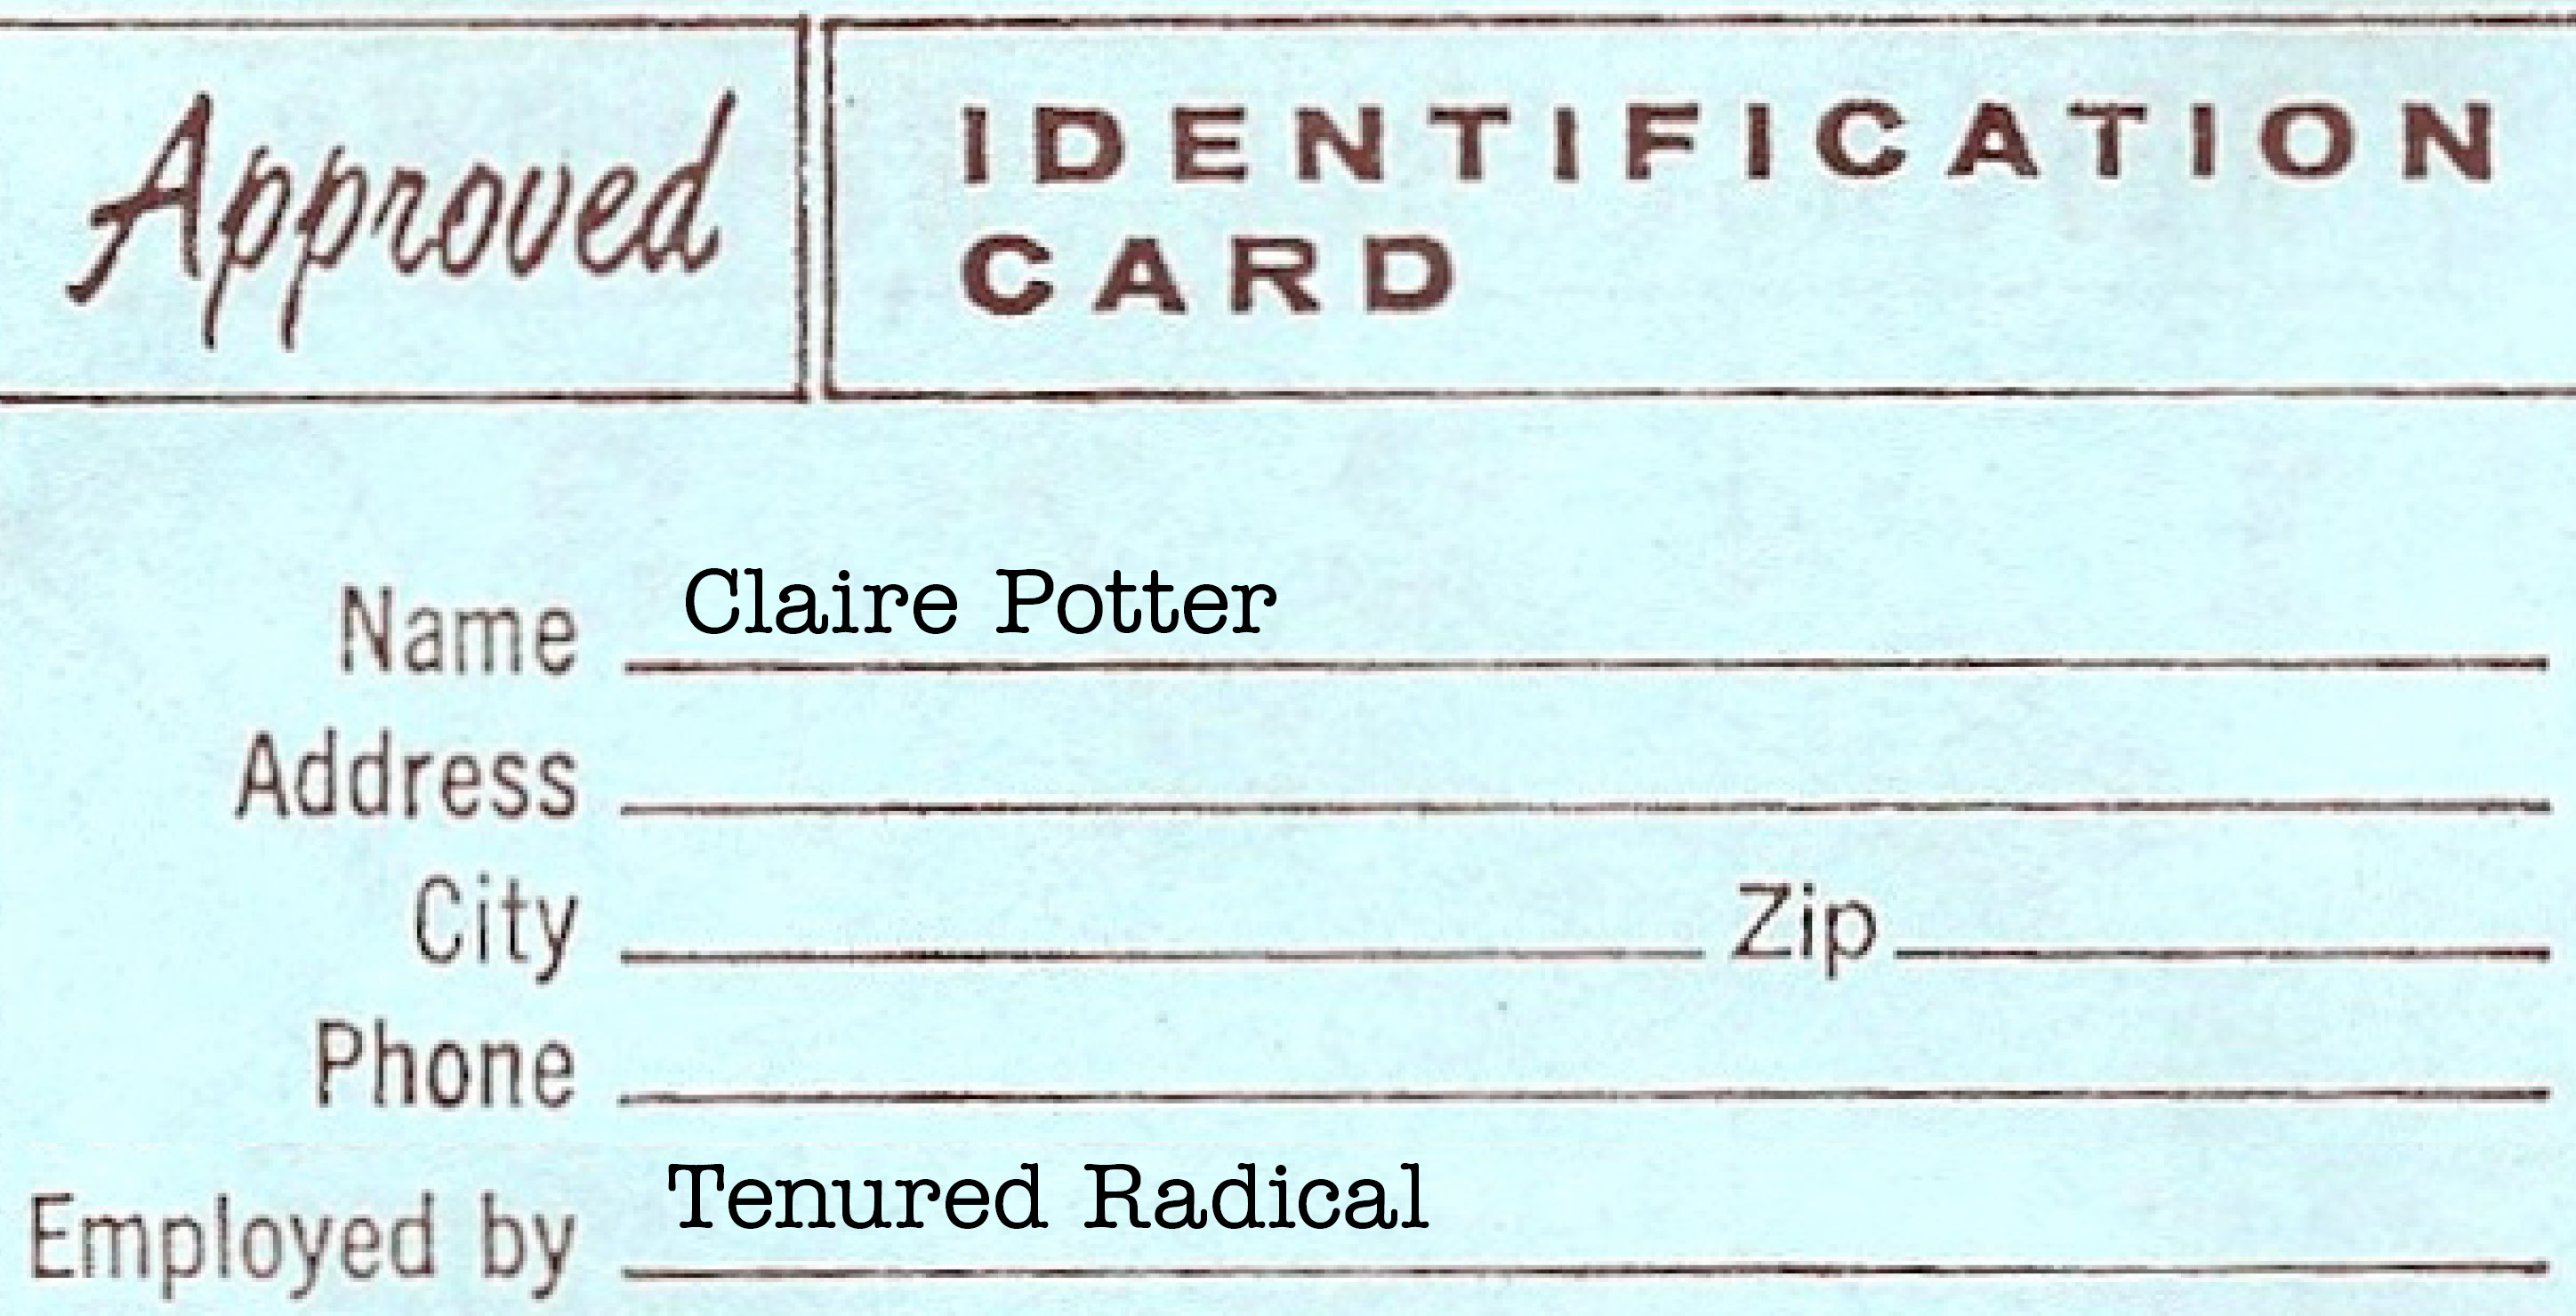 An identification card for Claire Potter, identifying them as a Tenured Radical